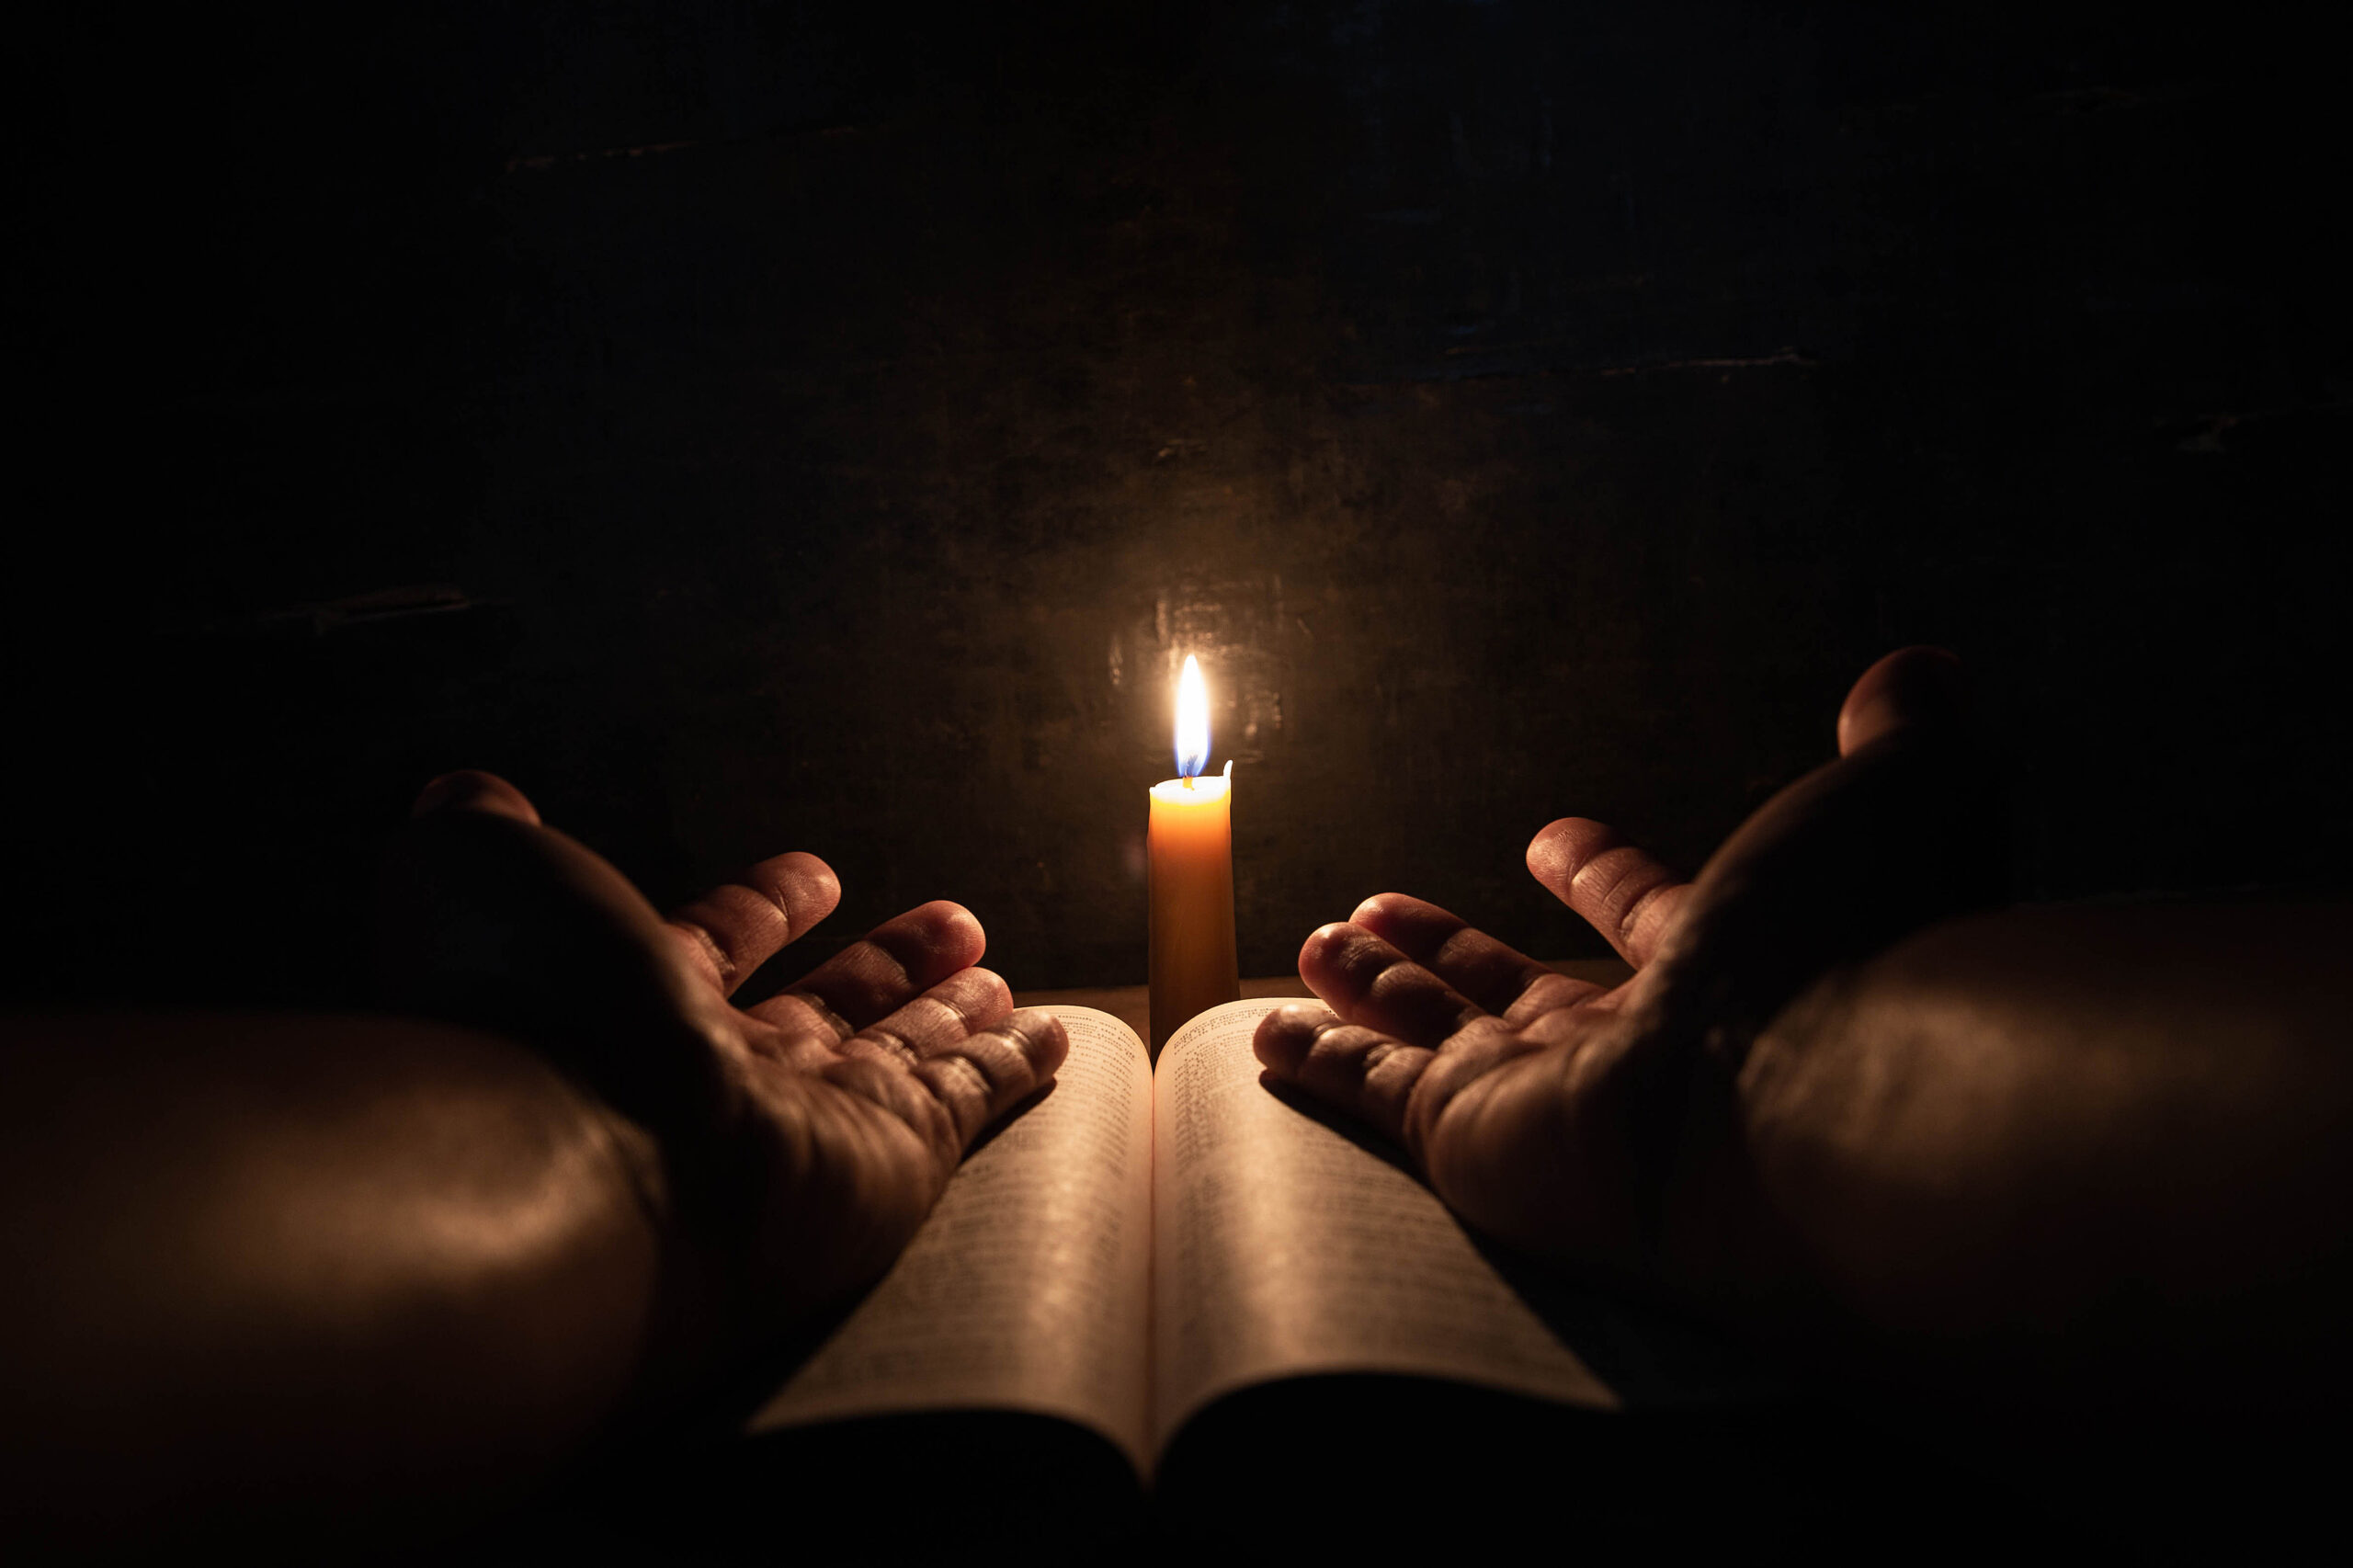 https://pays-salonais.epudf.org/wp-content/uploads/sites/34/2022/10/men-praying-on-the-bible-in-the-light-candles-selective-focus-scaled.jpg